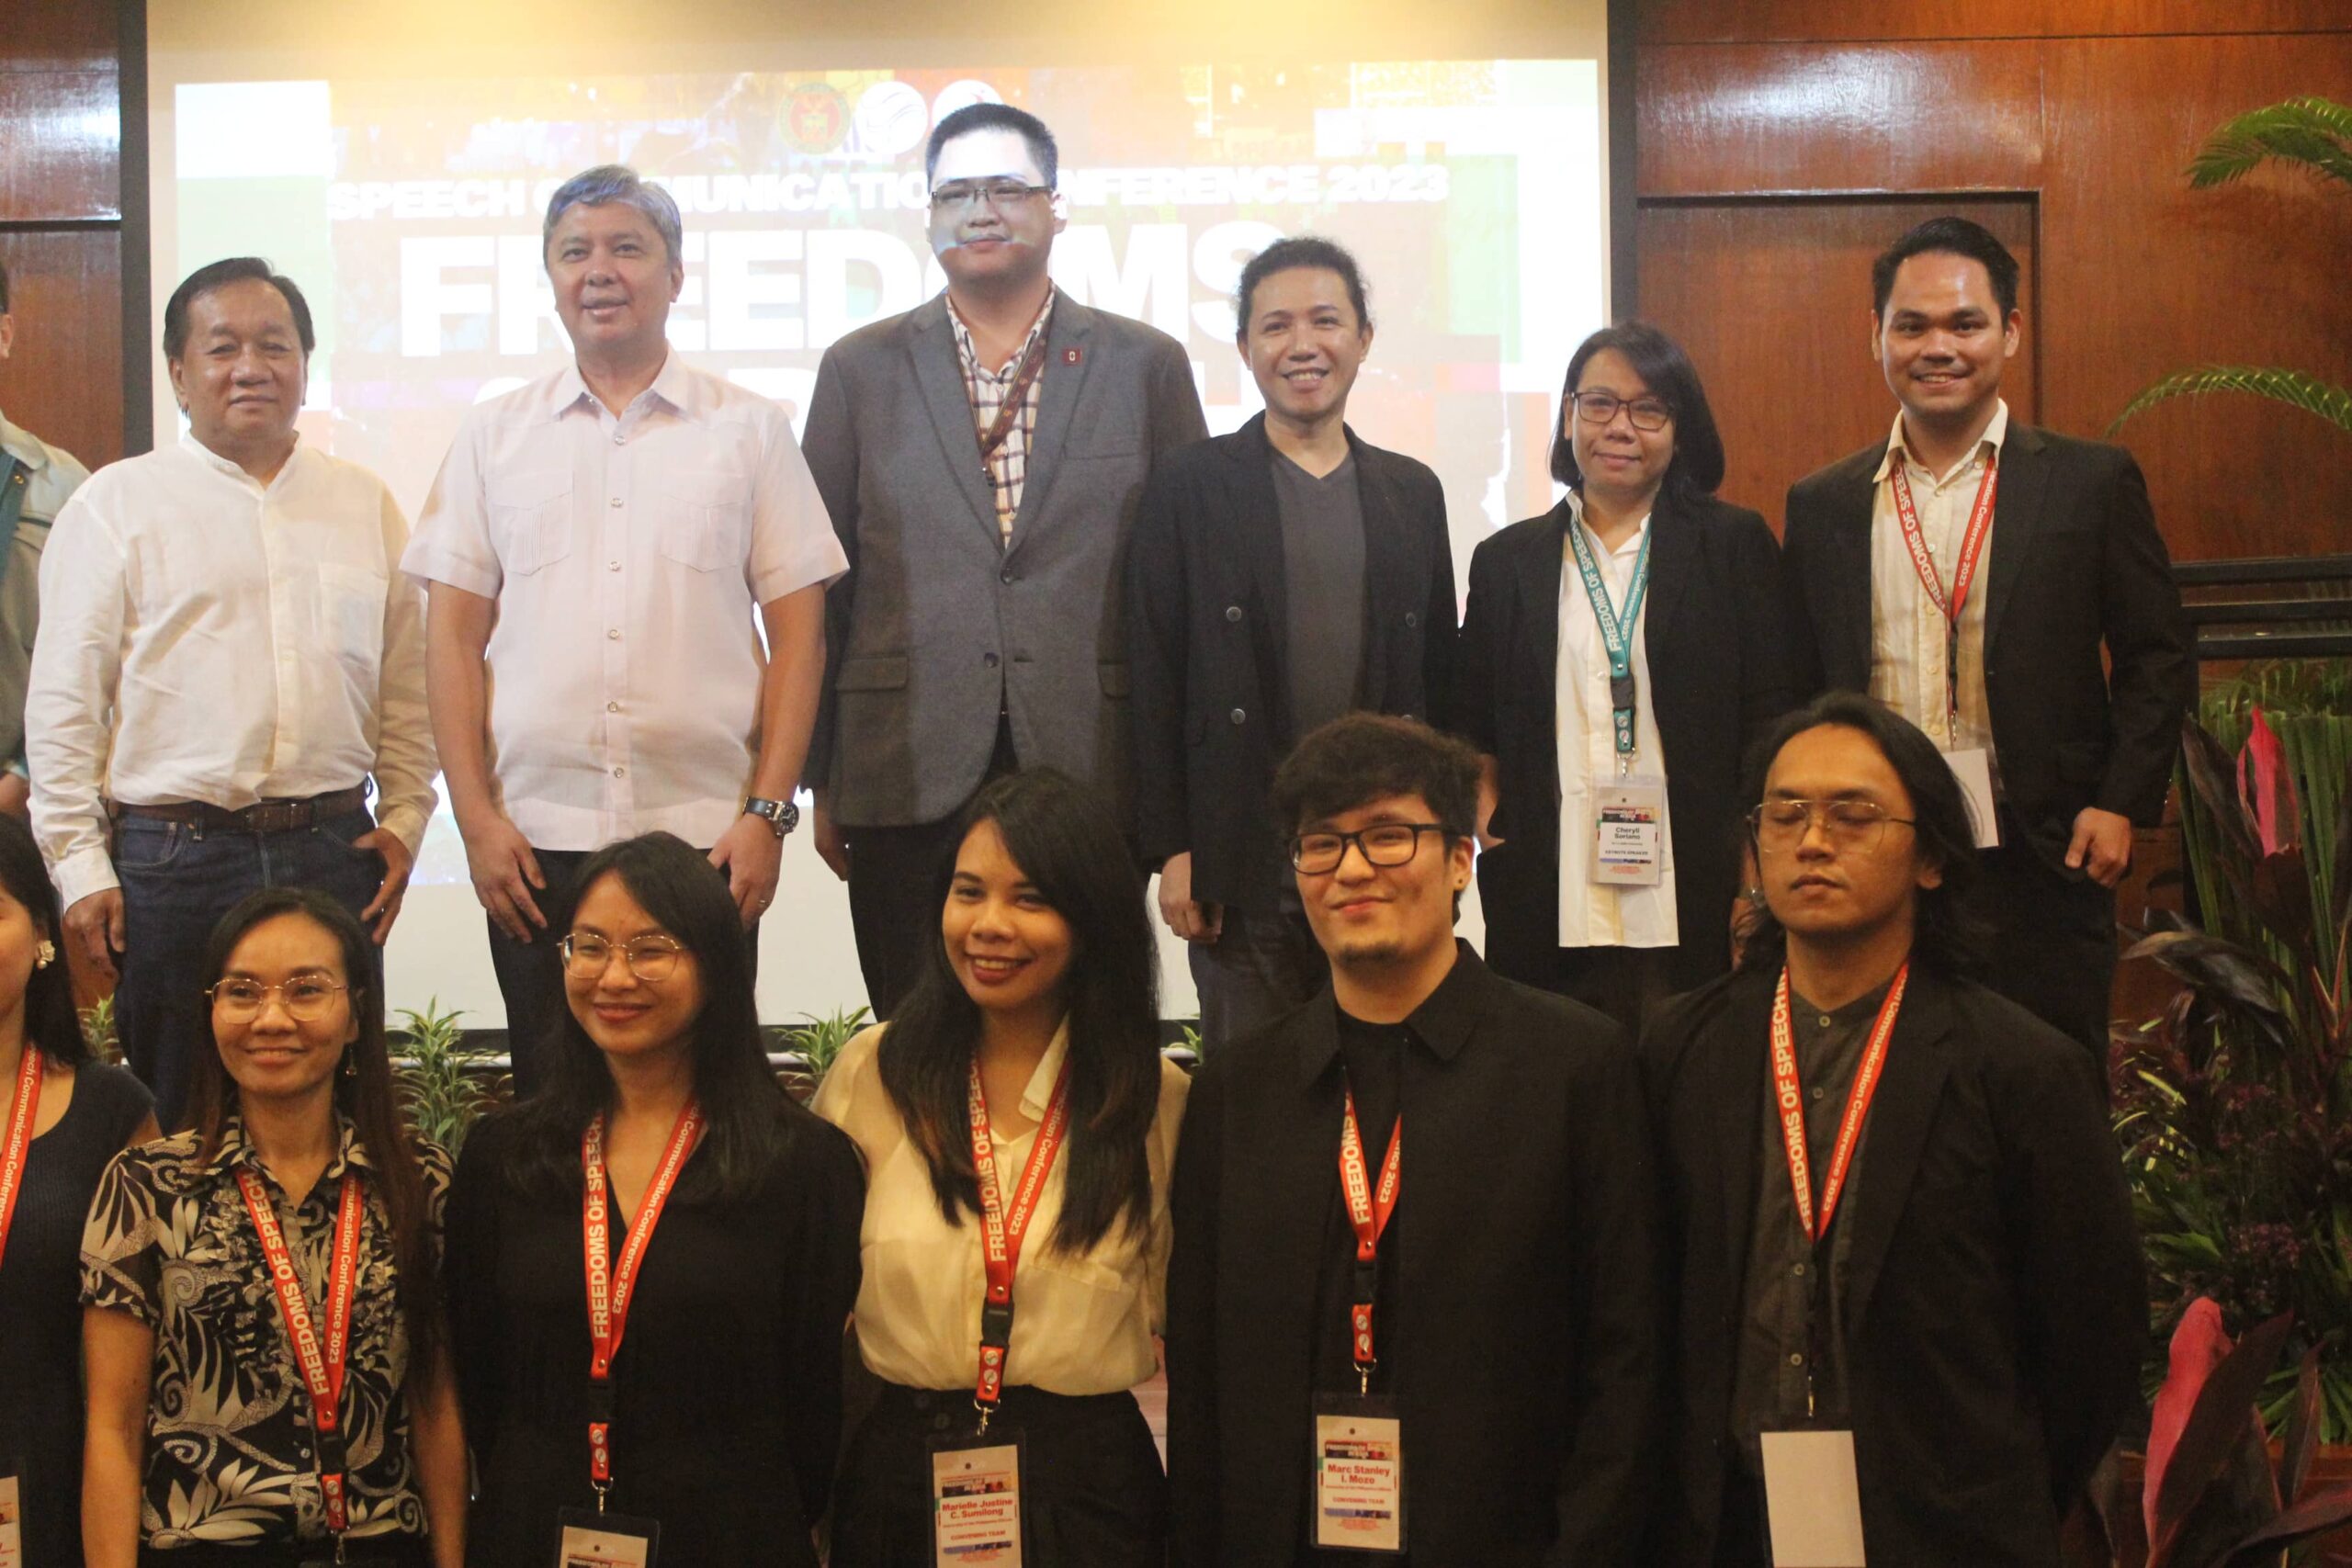 The UP Department of Speech Communication and Theatre Arts held its "Freedoms of Speech in Asia" conference on October 26-27. Photo: Rex Espiritu/DZUP